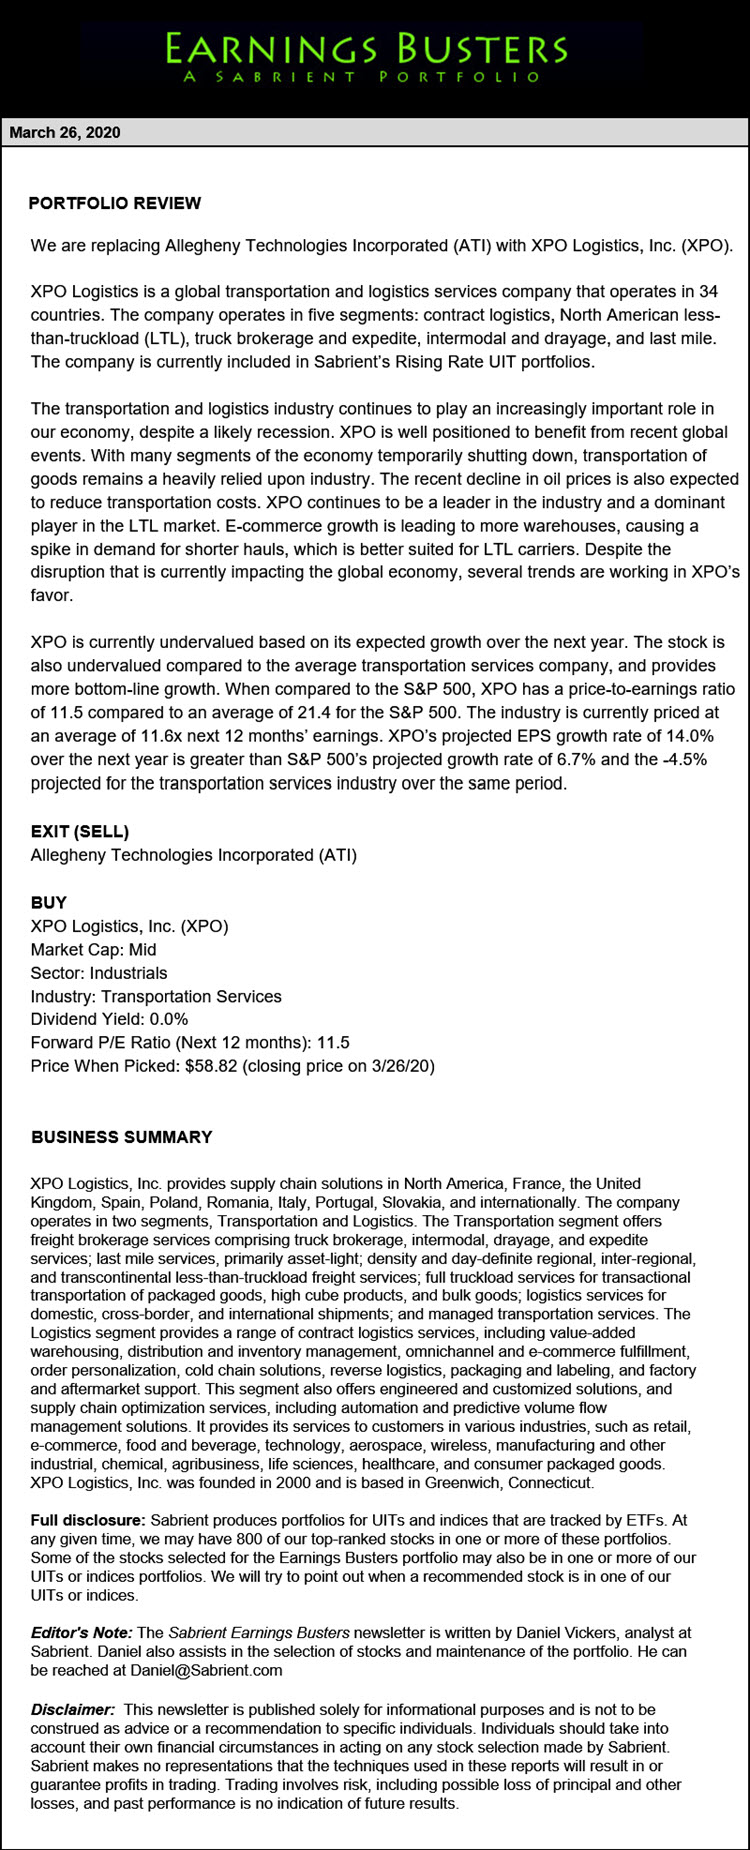 Earnings Busters Newsletter - Narch 26, 2020